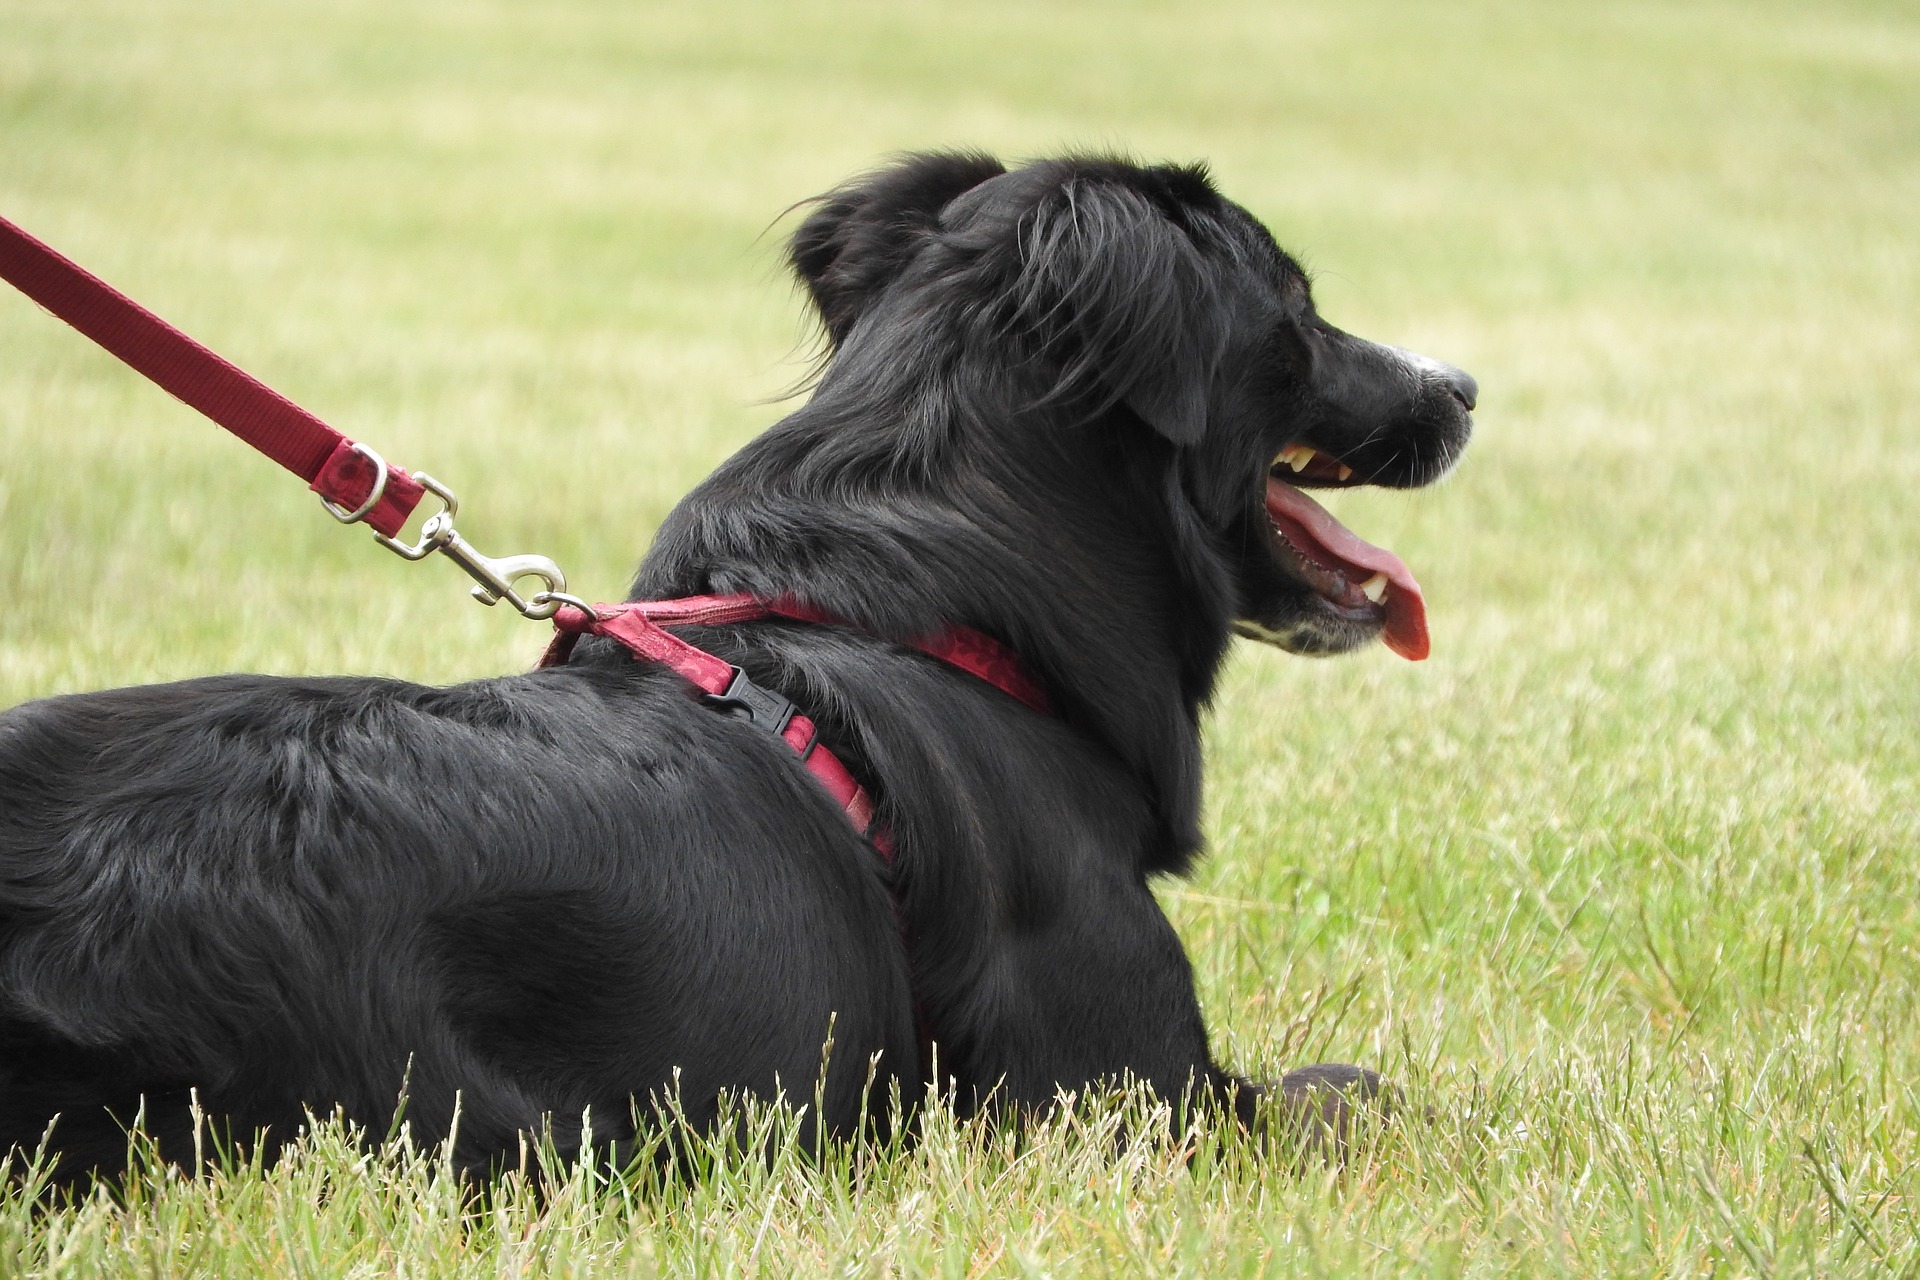 A black Collie laying down on the grass with a red lead